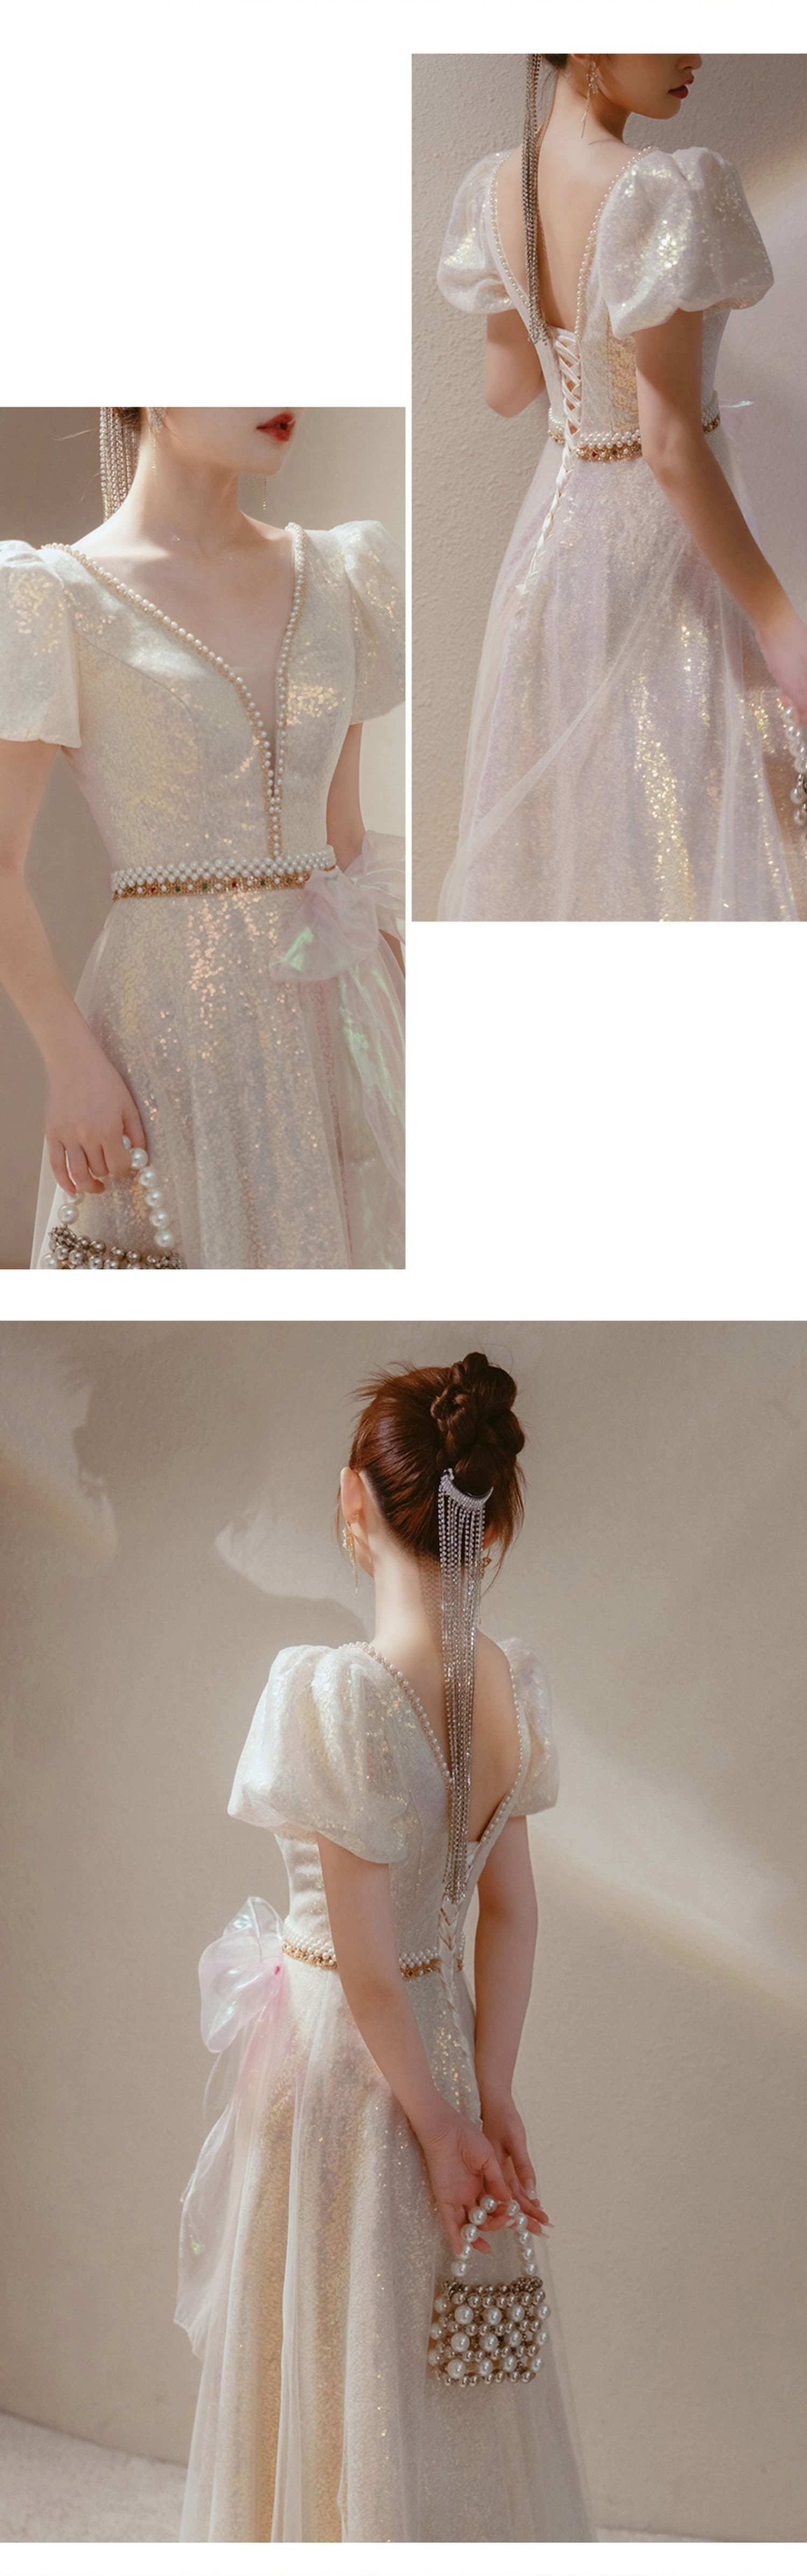 Luxury-V-Neck-Mermaid-Champagne-Prom-Dress-Unique-Ball-Gown13